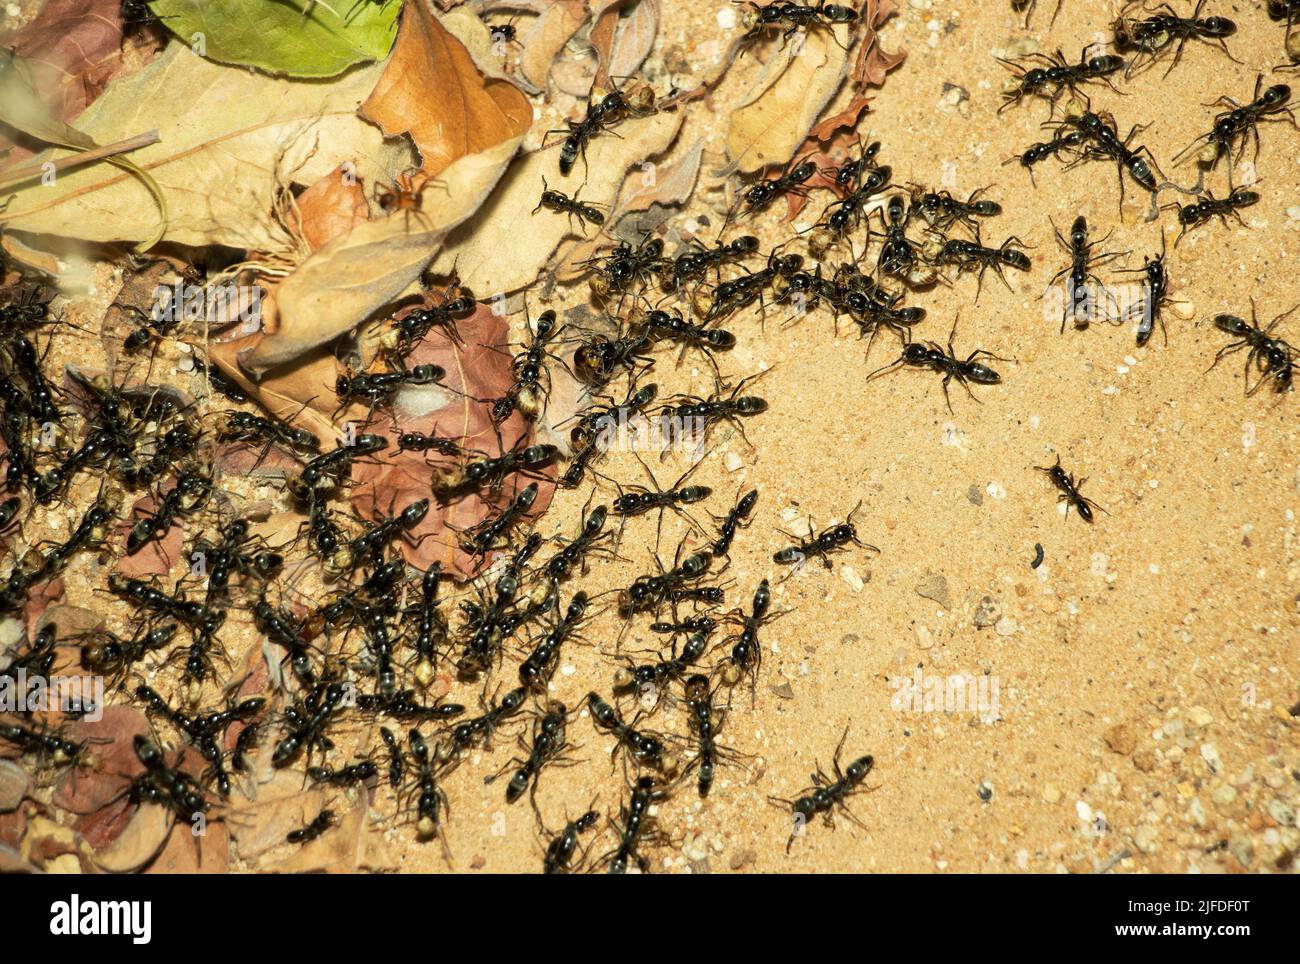 A column of Matabele or Hissing Ants has made a raid on a termite colony and return to their bivouac with their prey. They are formidable predators Stock Photo